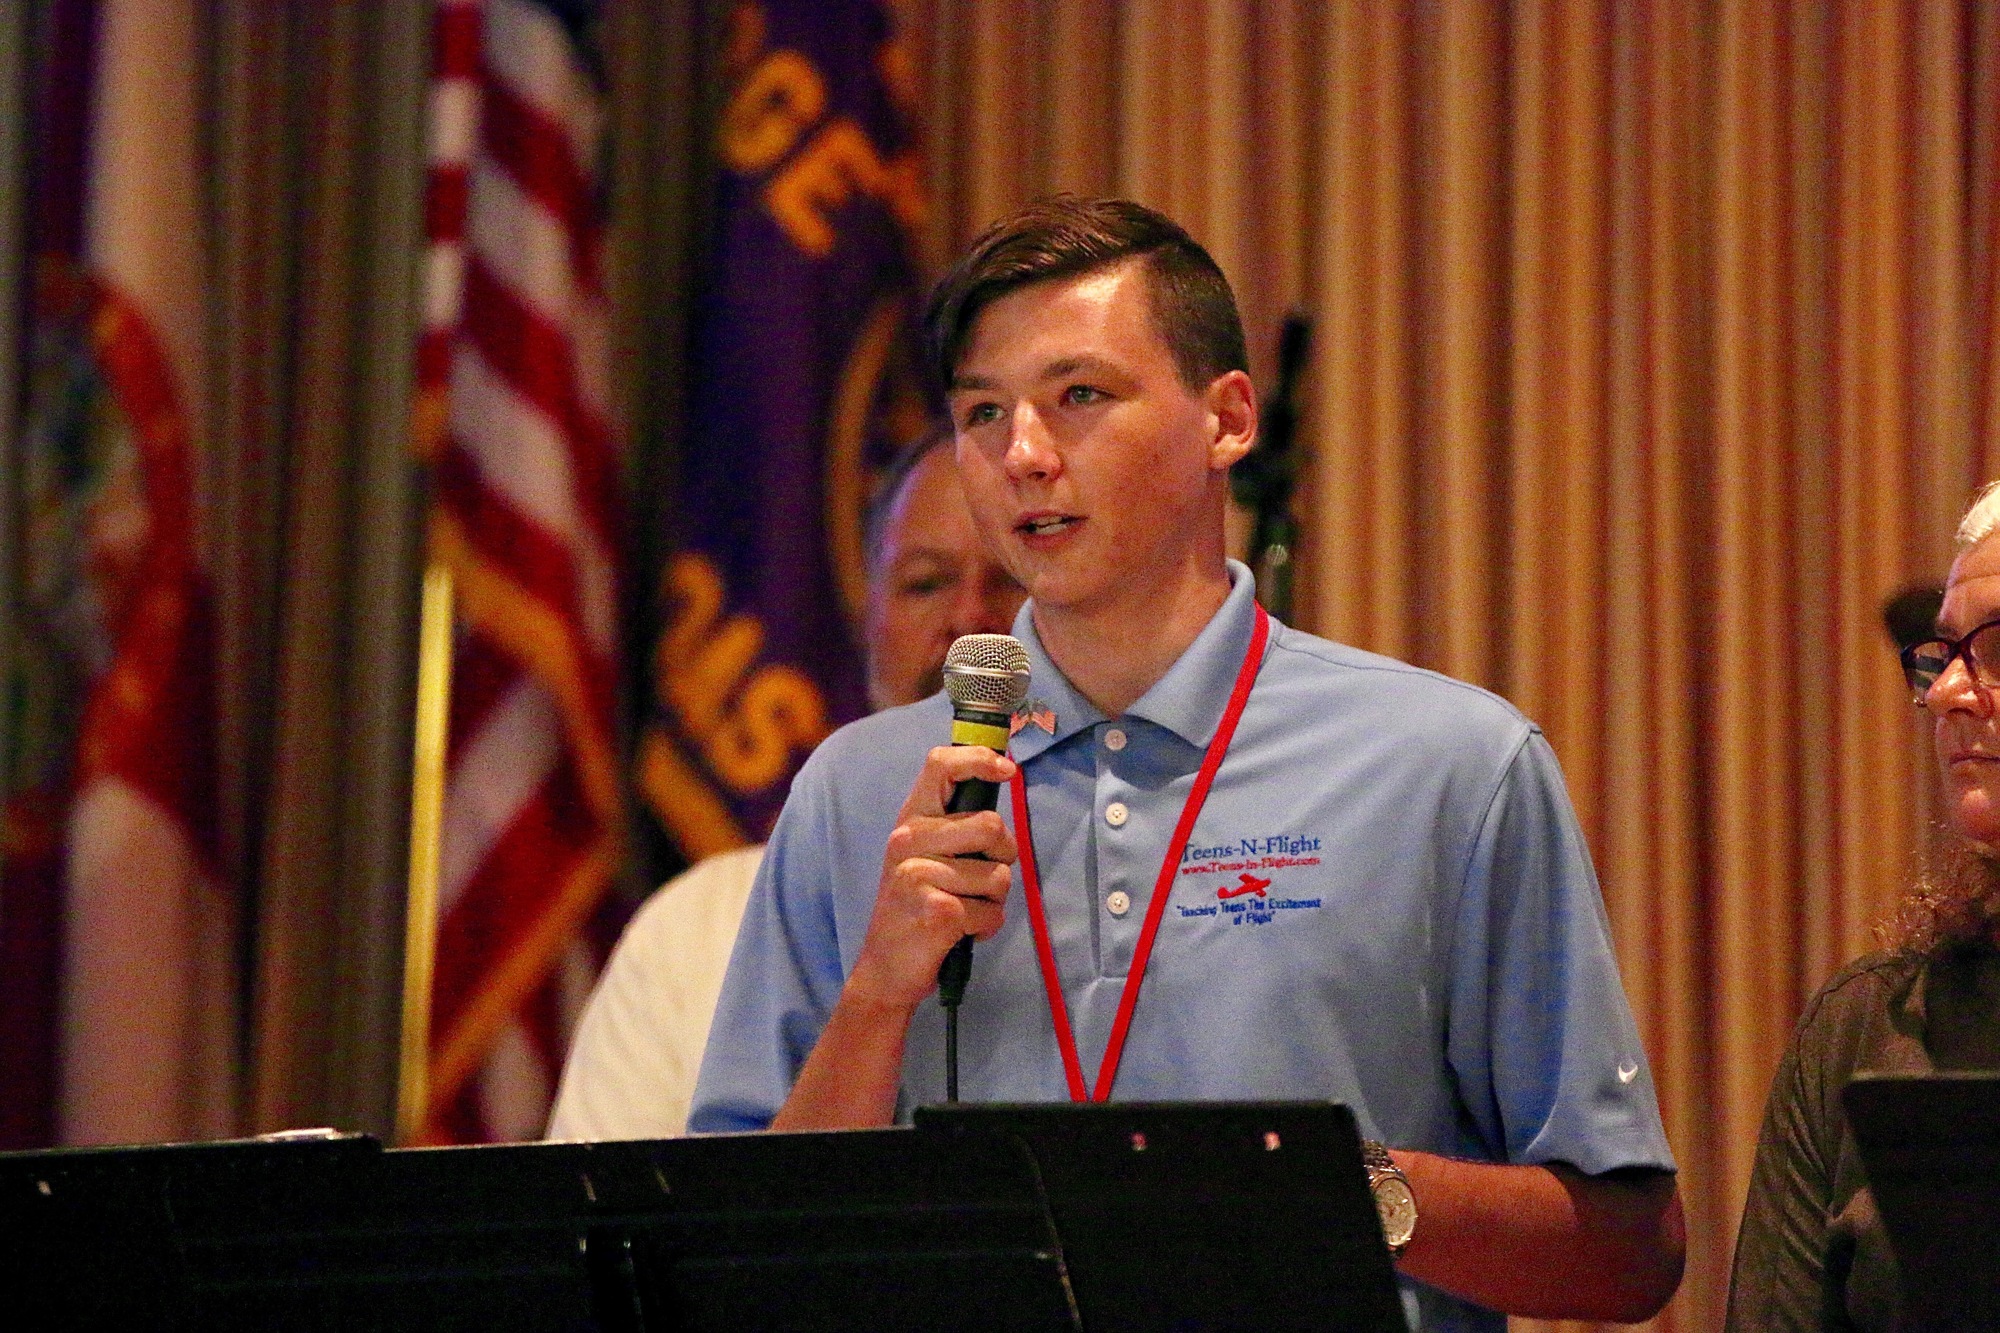 Colton Kent, 18 and Flagler Palm Coast High School student dual-enrolled at Daytona State College, addresses attendees at Teens-in-Flight's Hangar Party Aug. 10. (Photo by Jonathan Simmons)